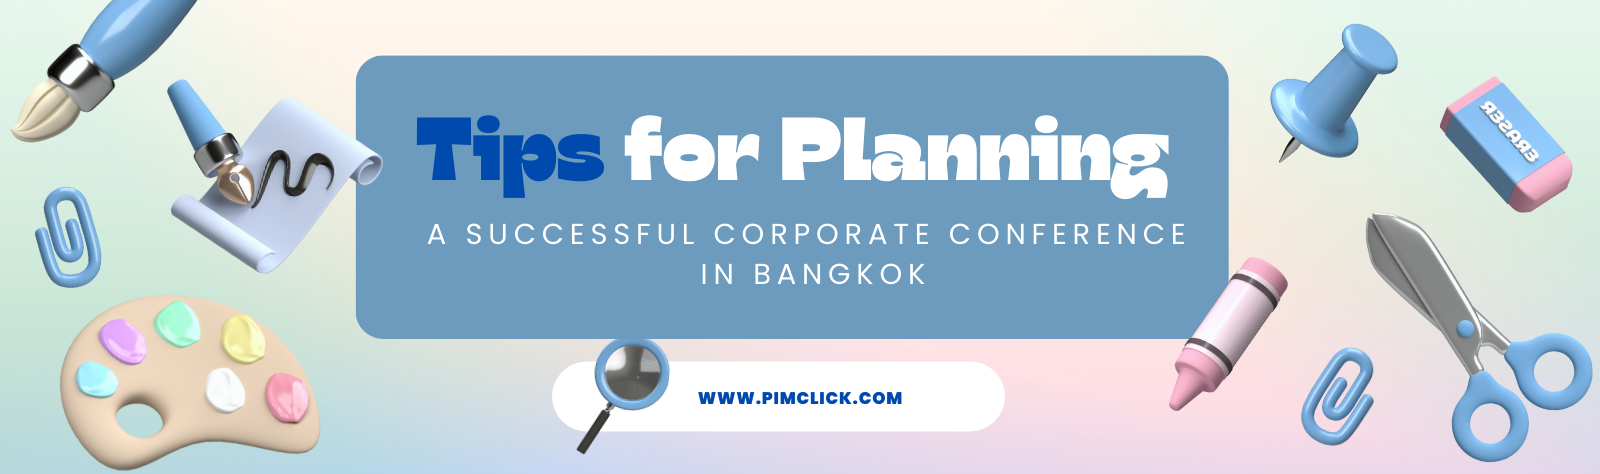 tips-for-planning-a-successful-corporate-conference-in-bangkok